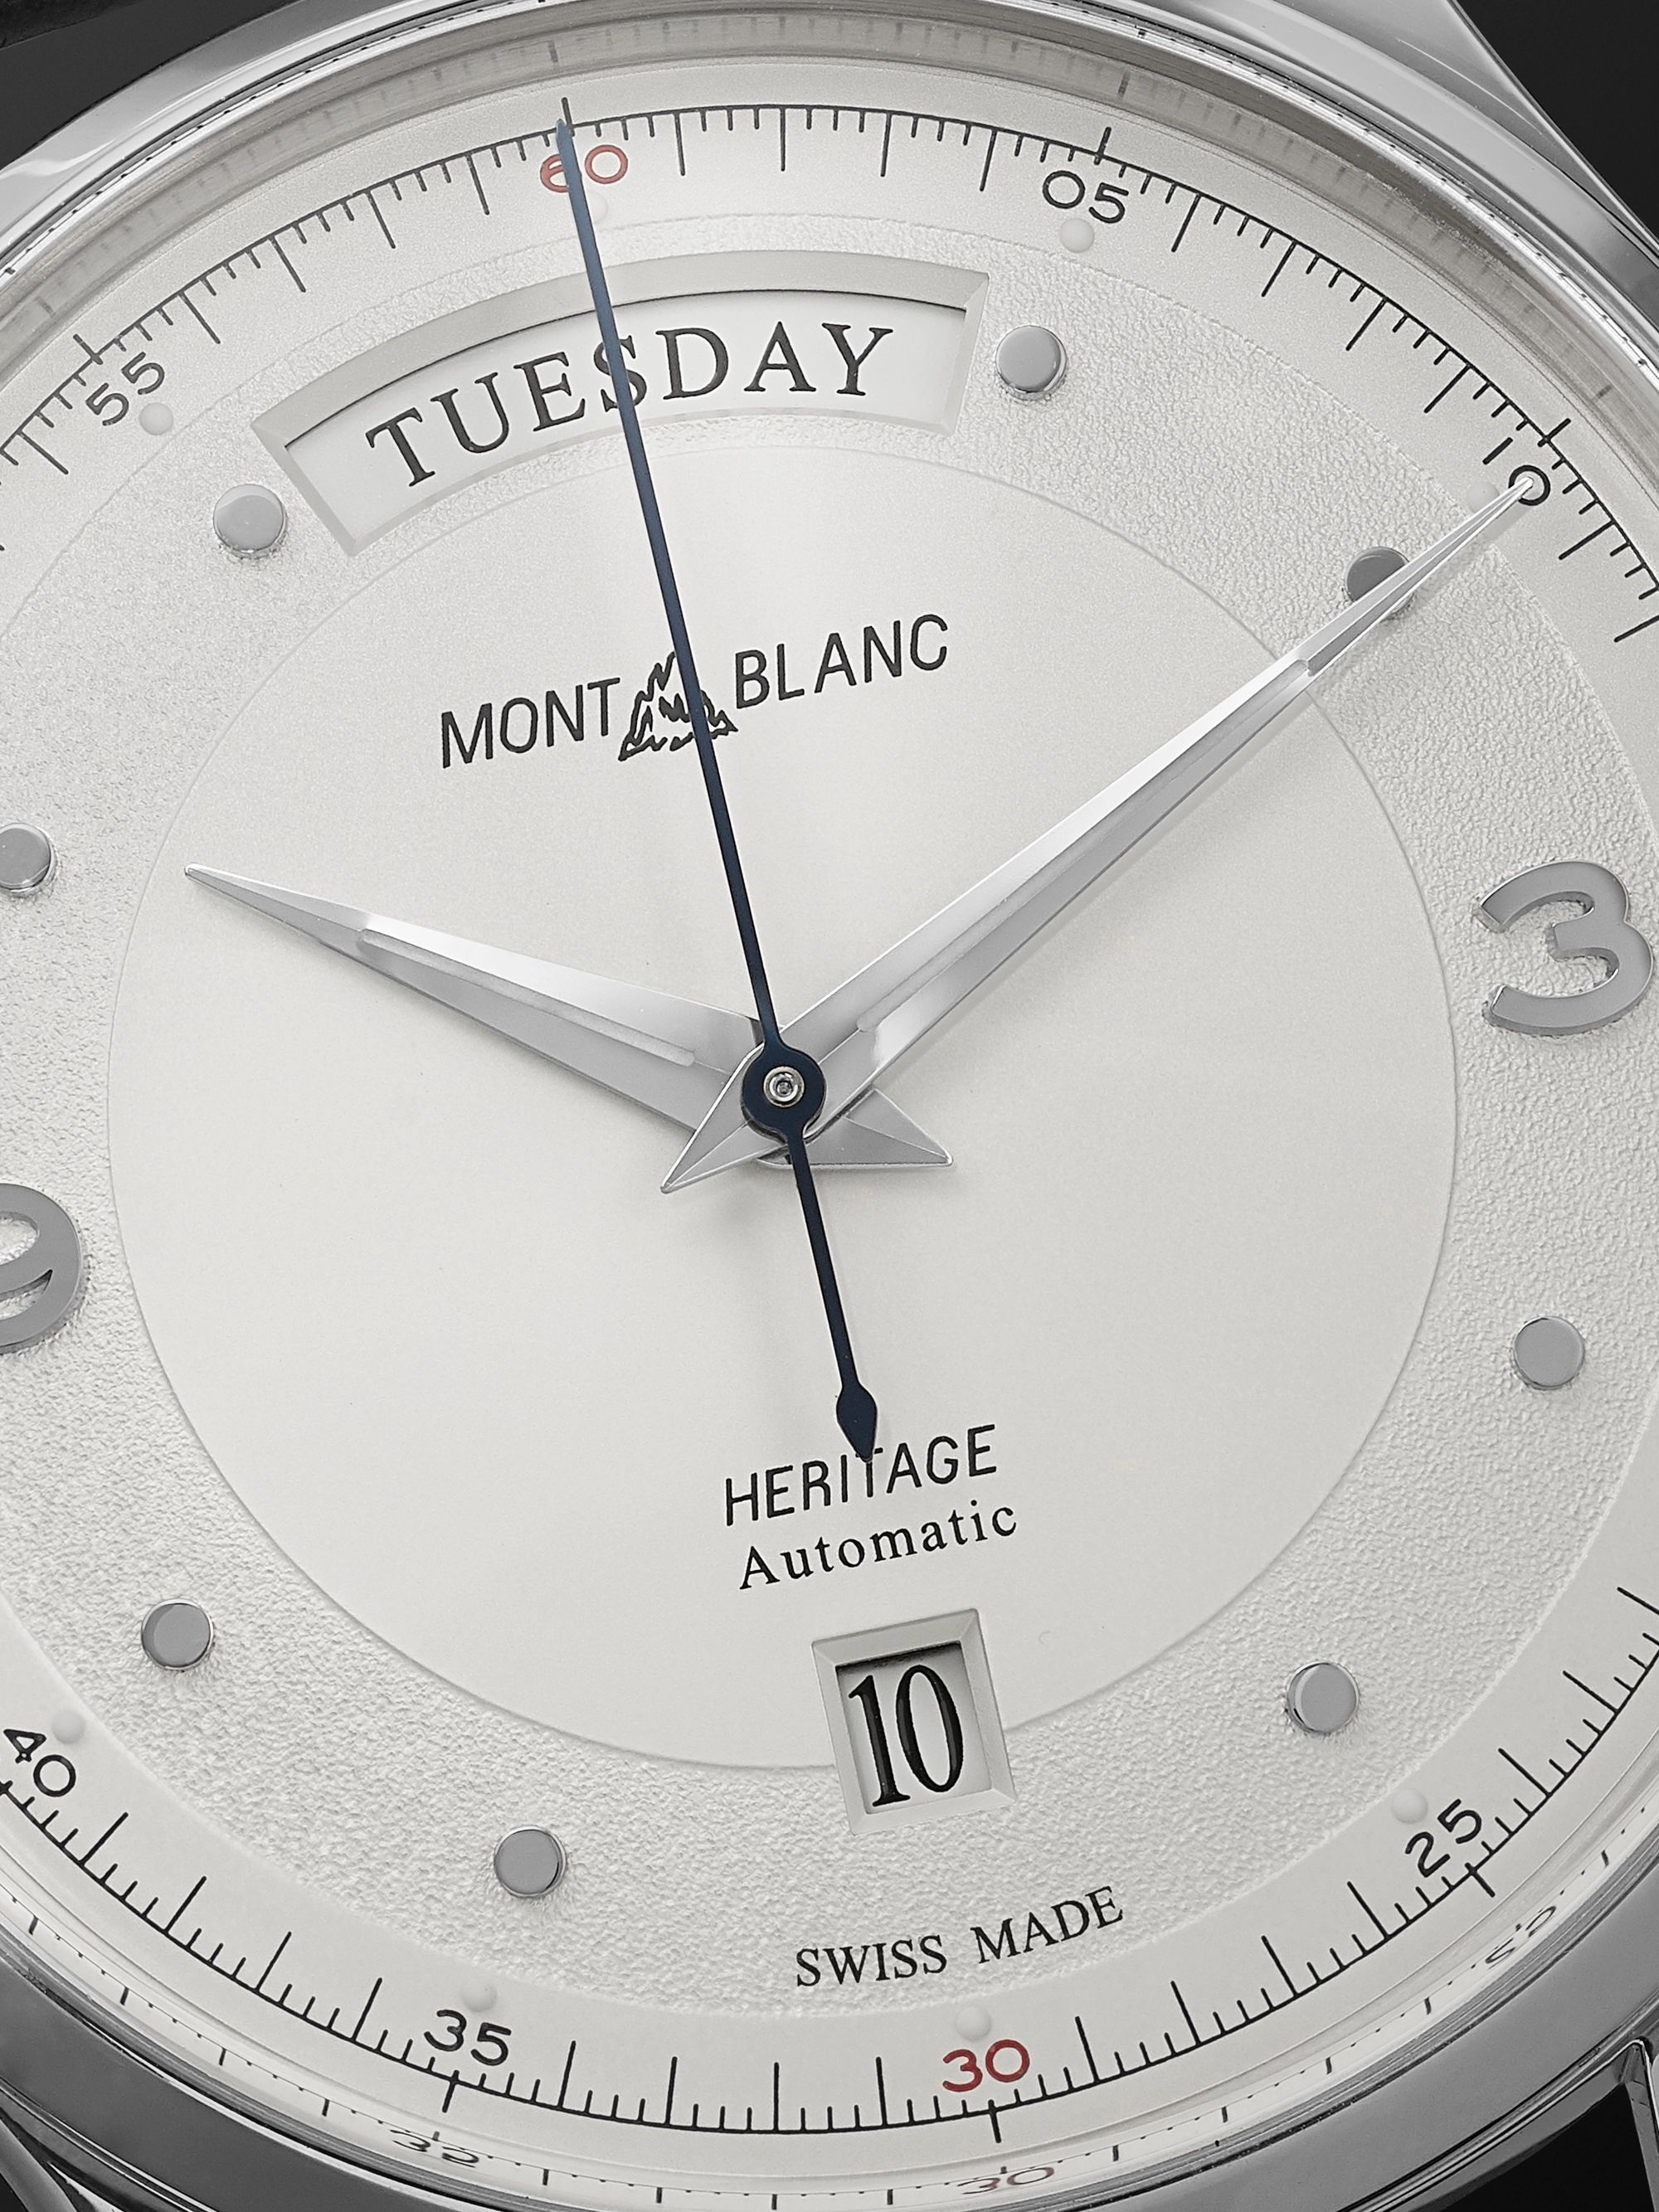 MONTBLANC Heritage Automatic Day-Date 39mm Stainless Steel and Alligator Watch, Ref. No. 119947